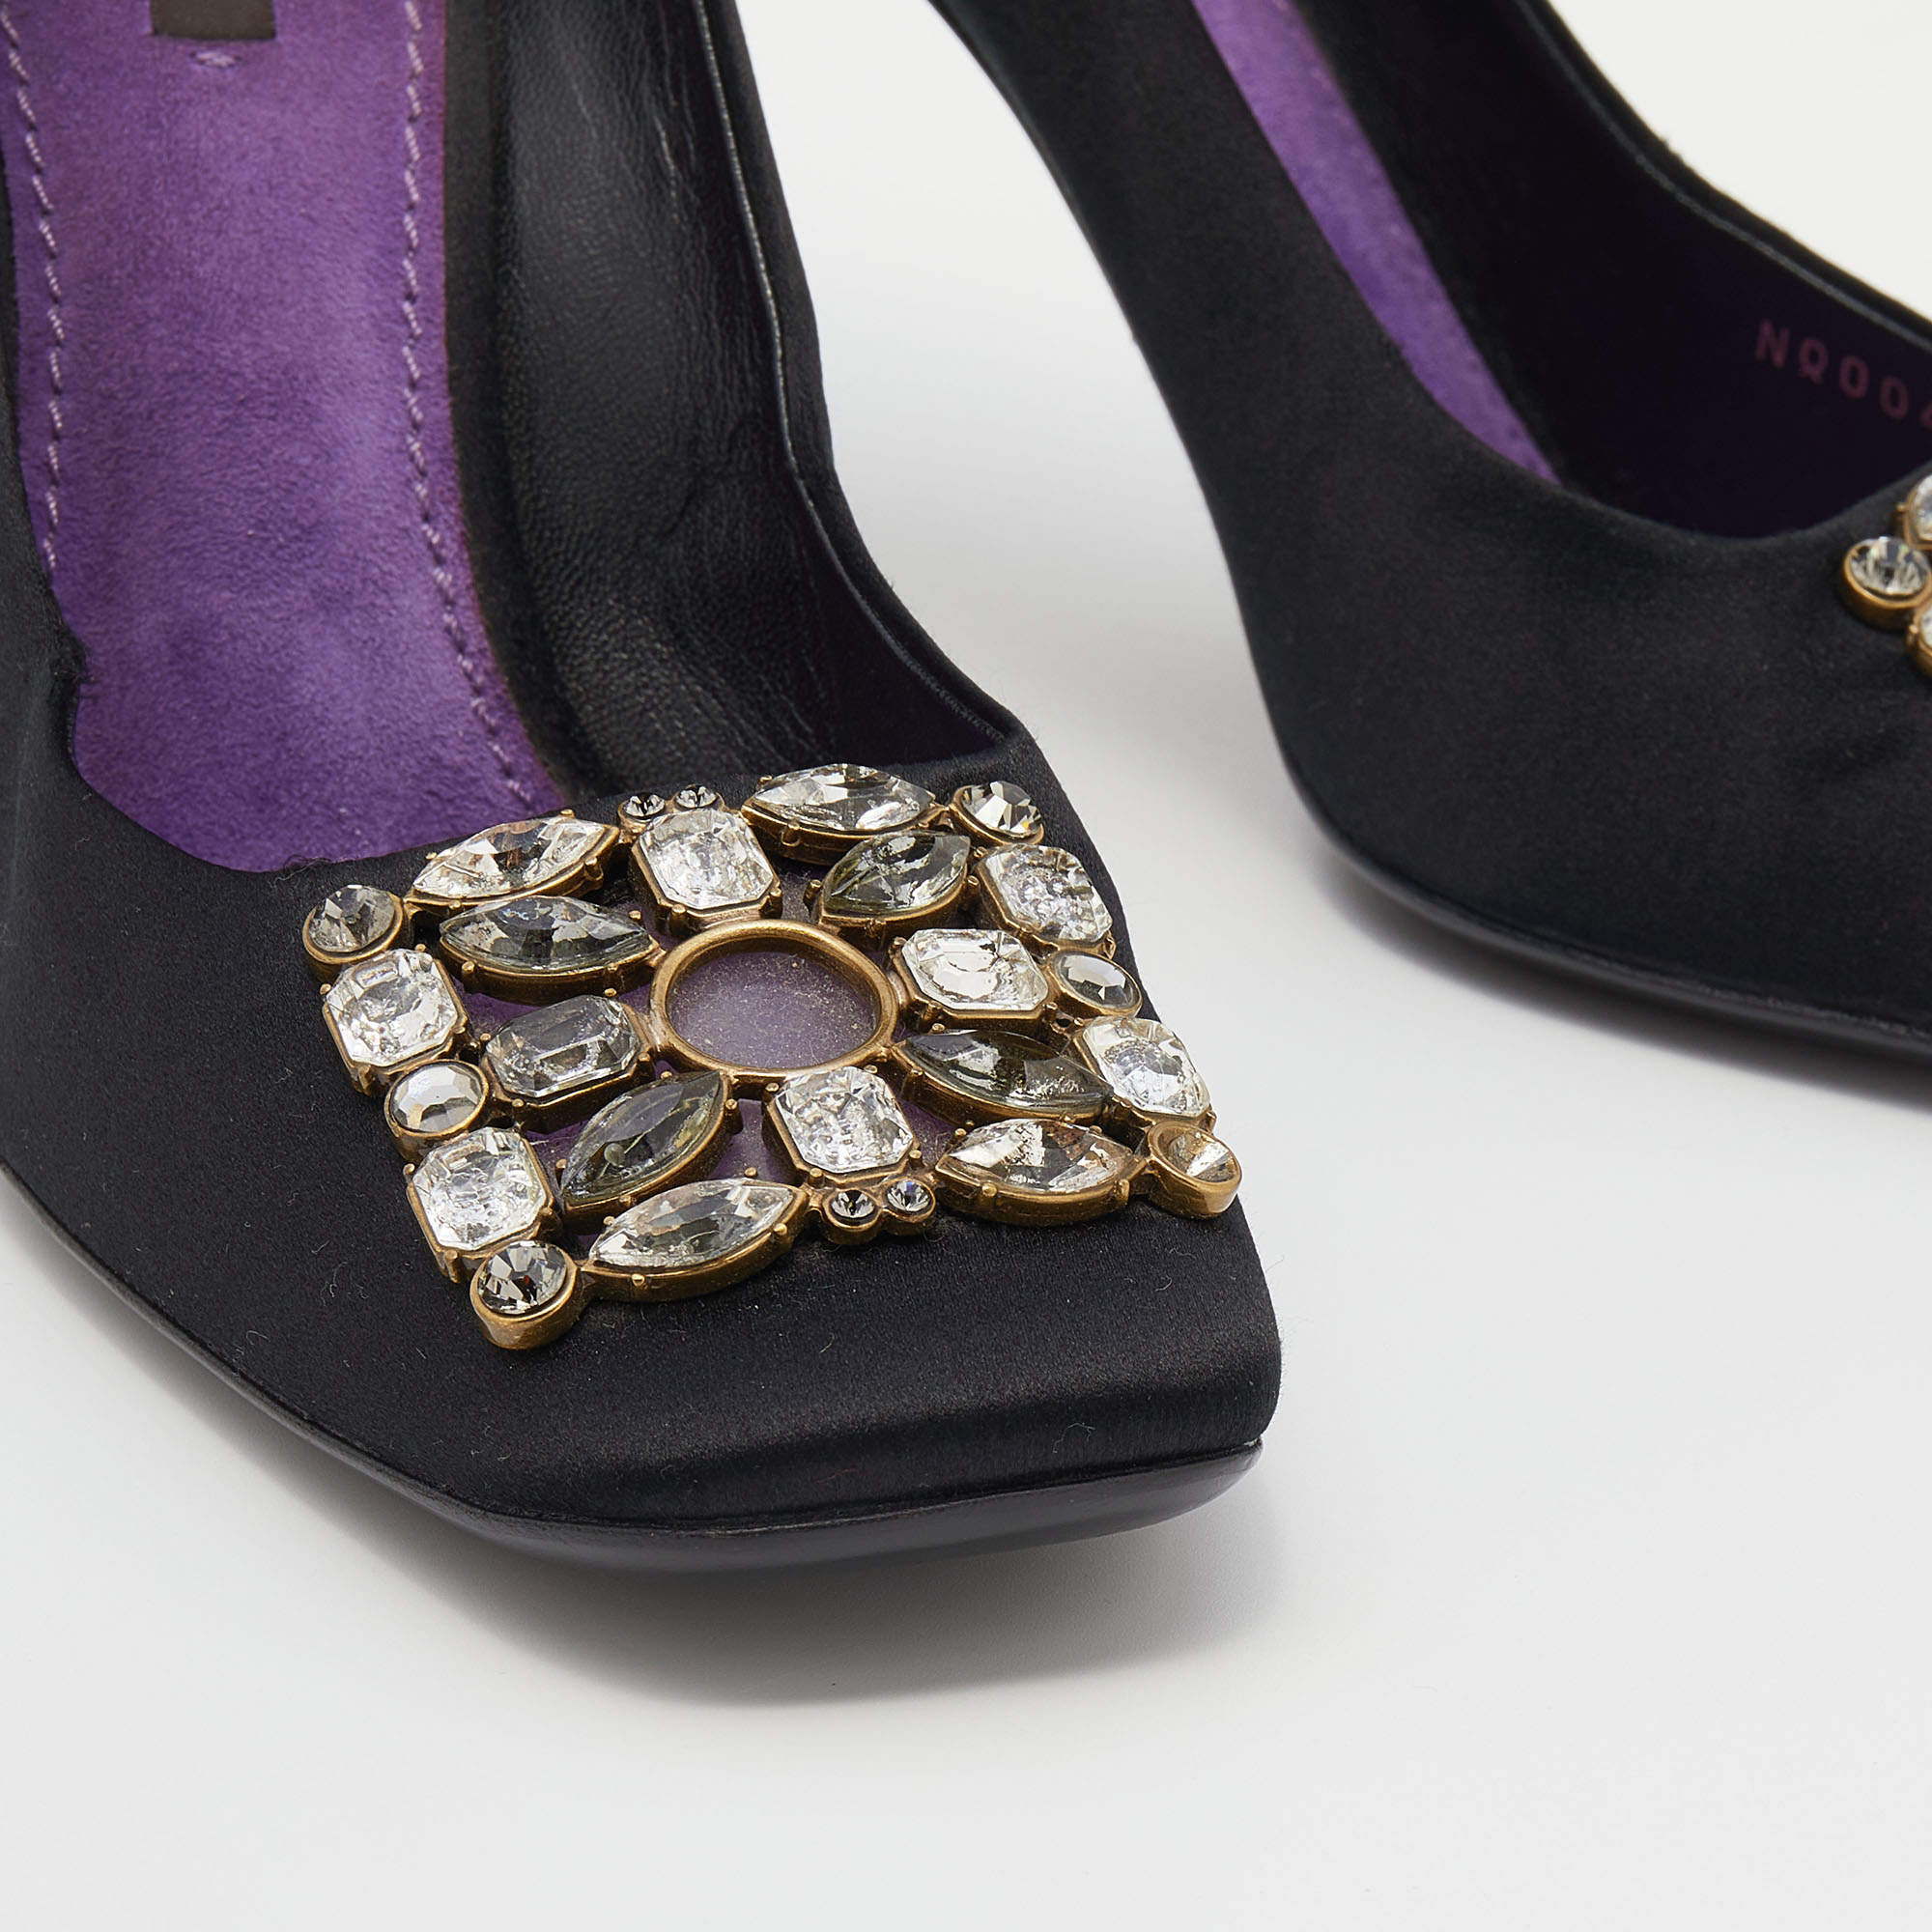 Louis Vuitton Crystal Embellished Square Toe Pumps